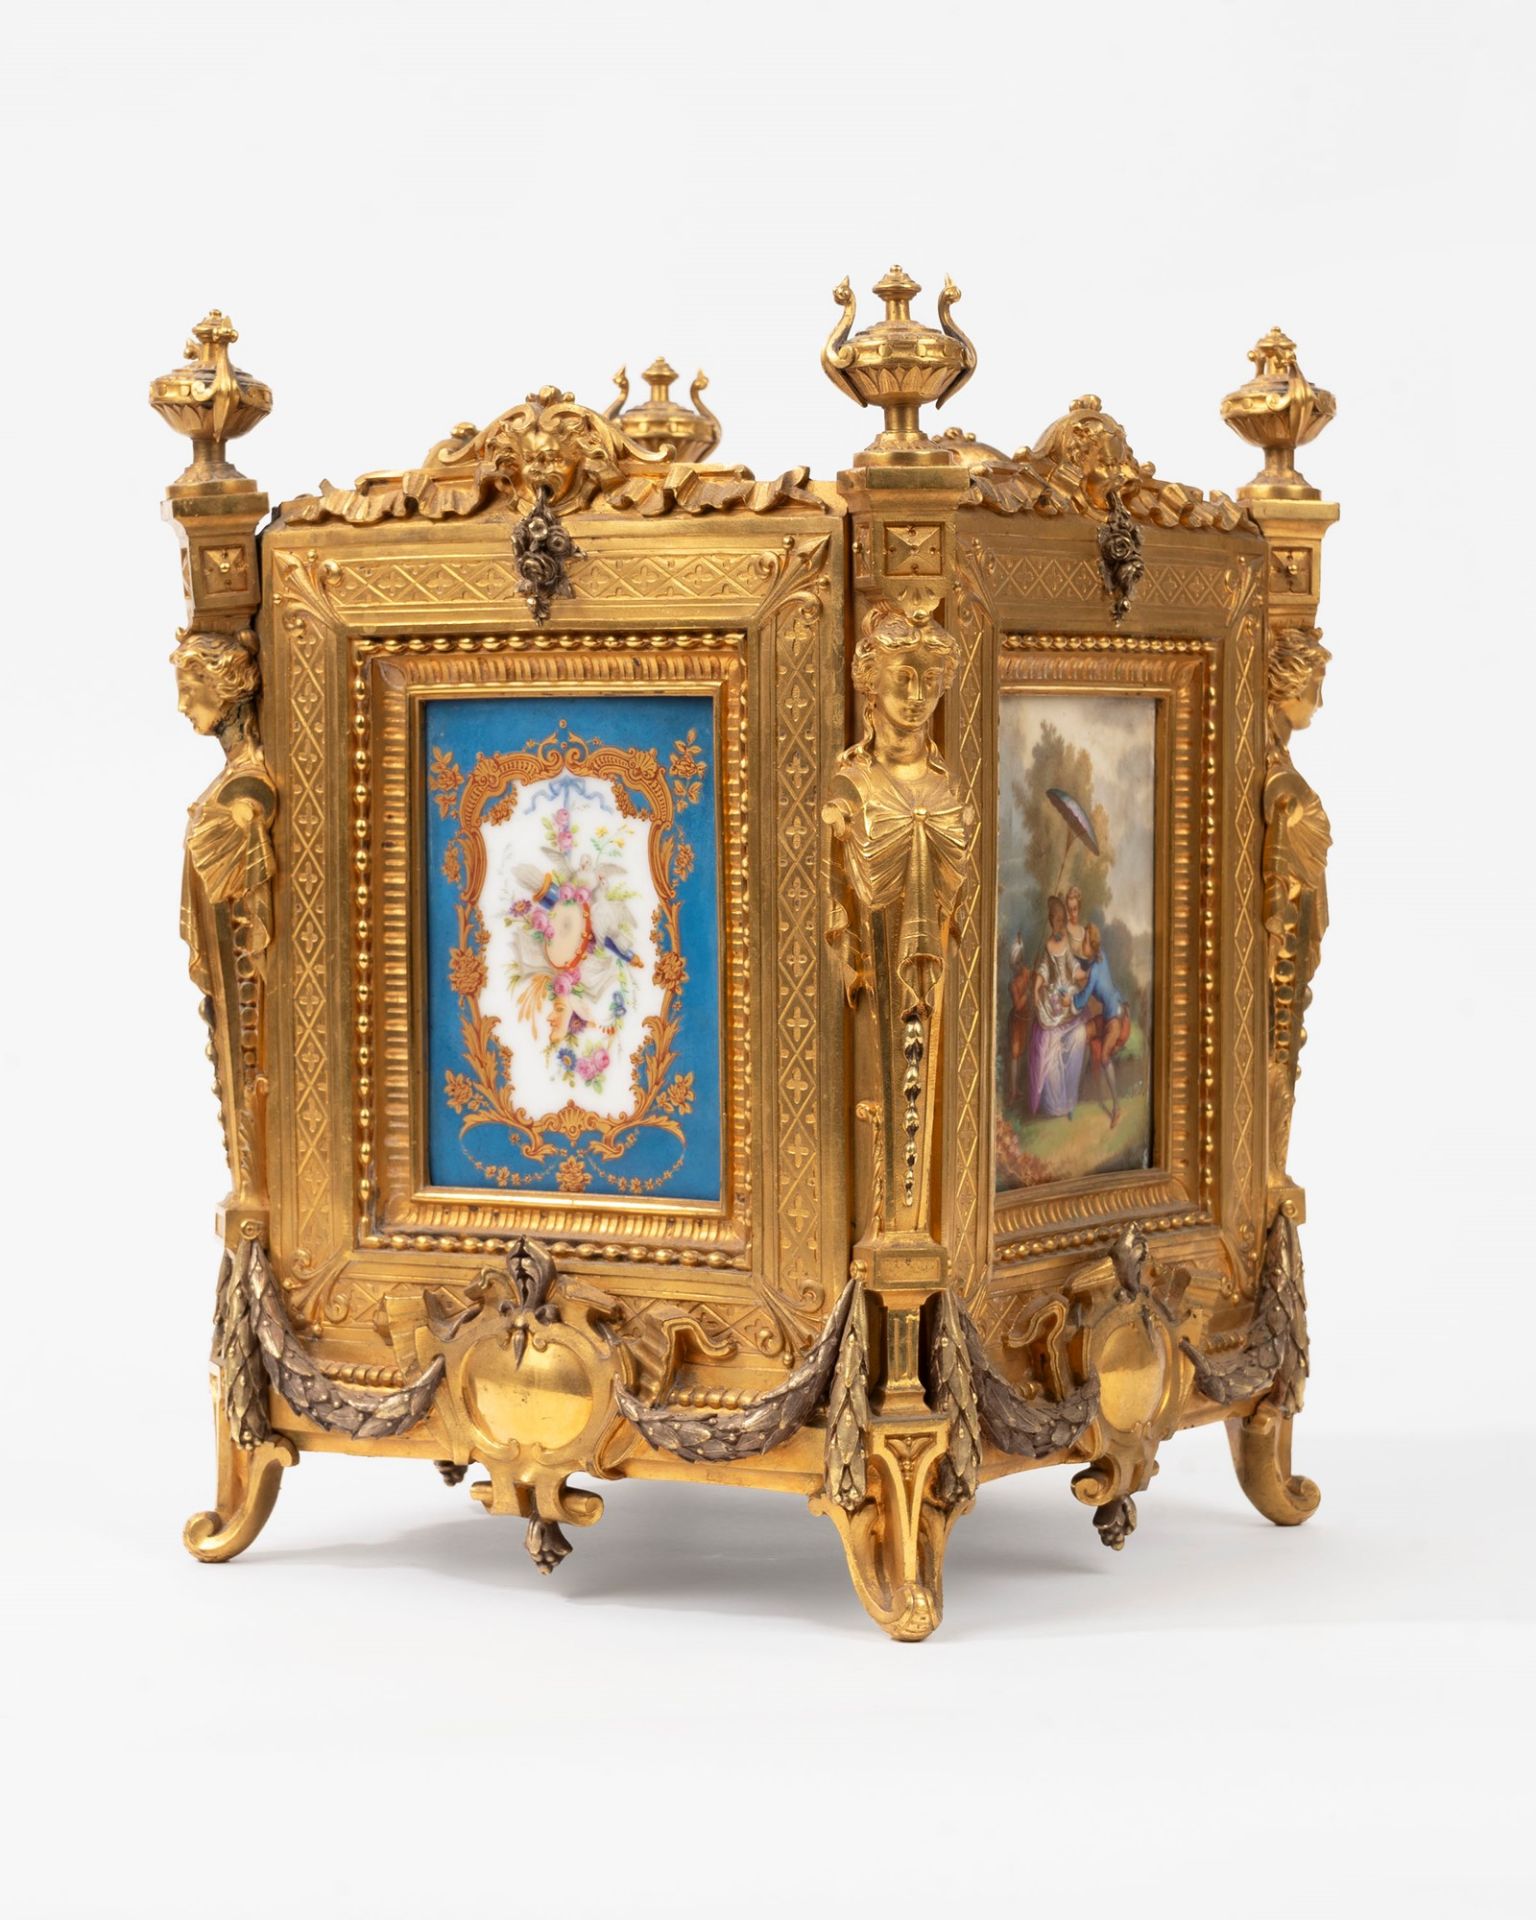 Important Napoleon III jardinier in gilded bronze and porcelain, France, 19th century - Image 2 of 7